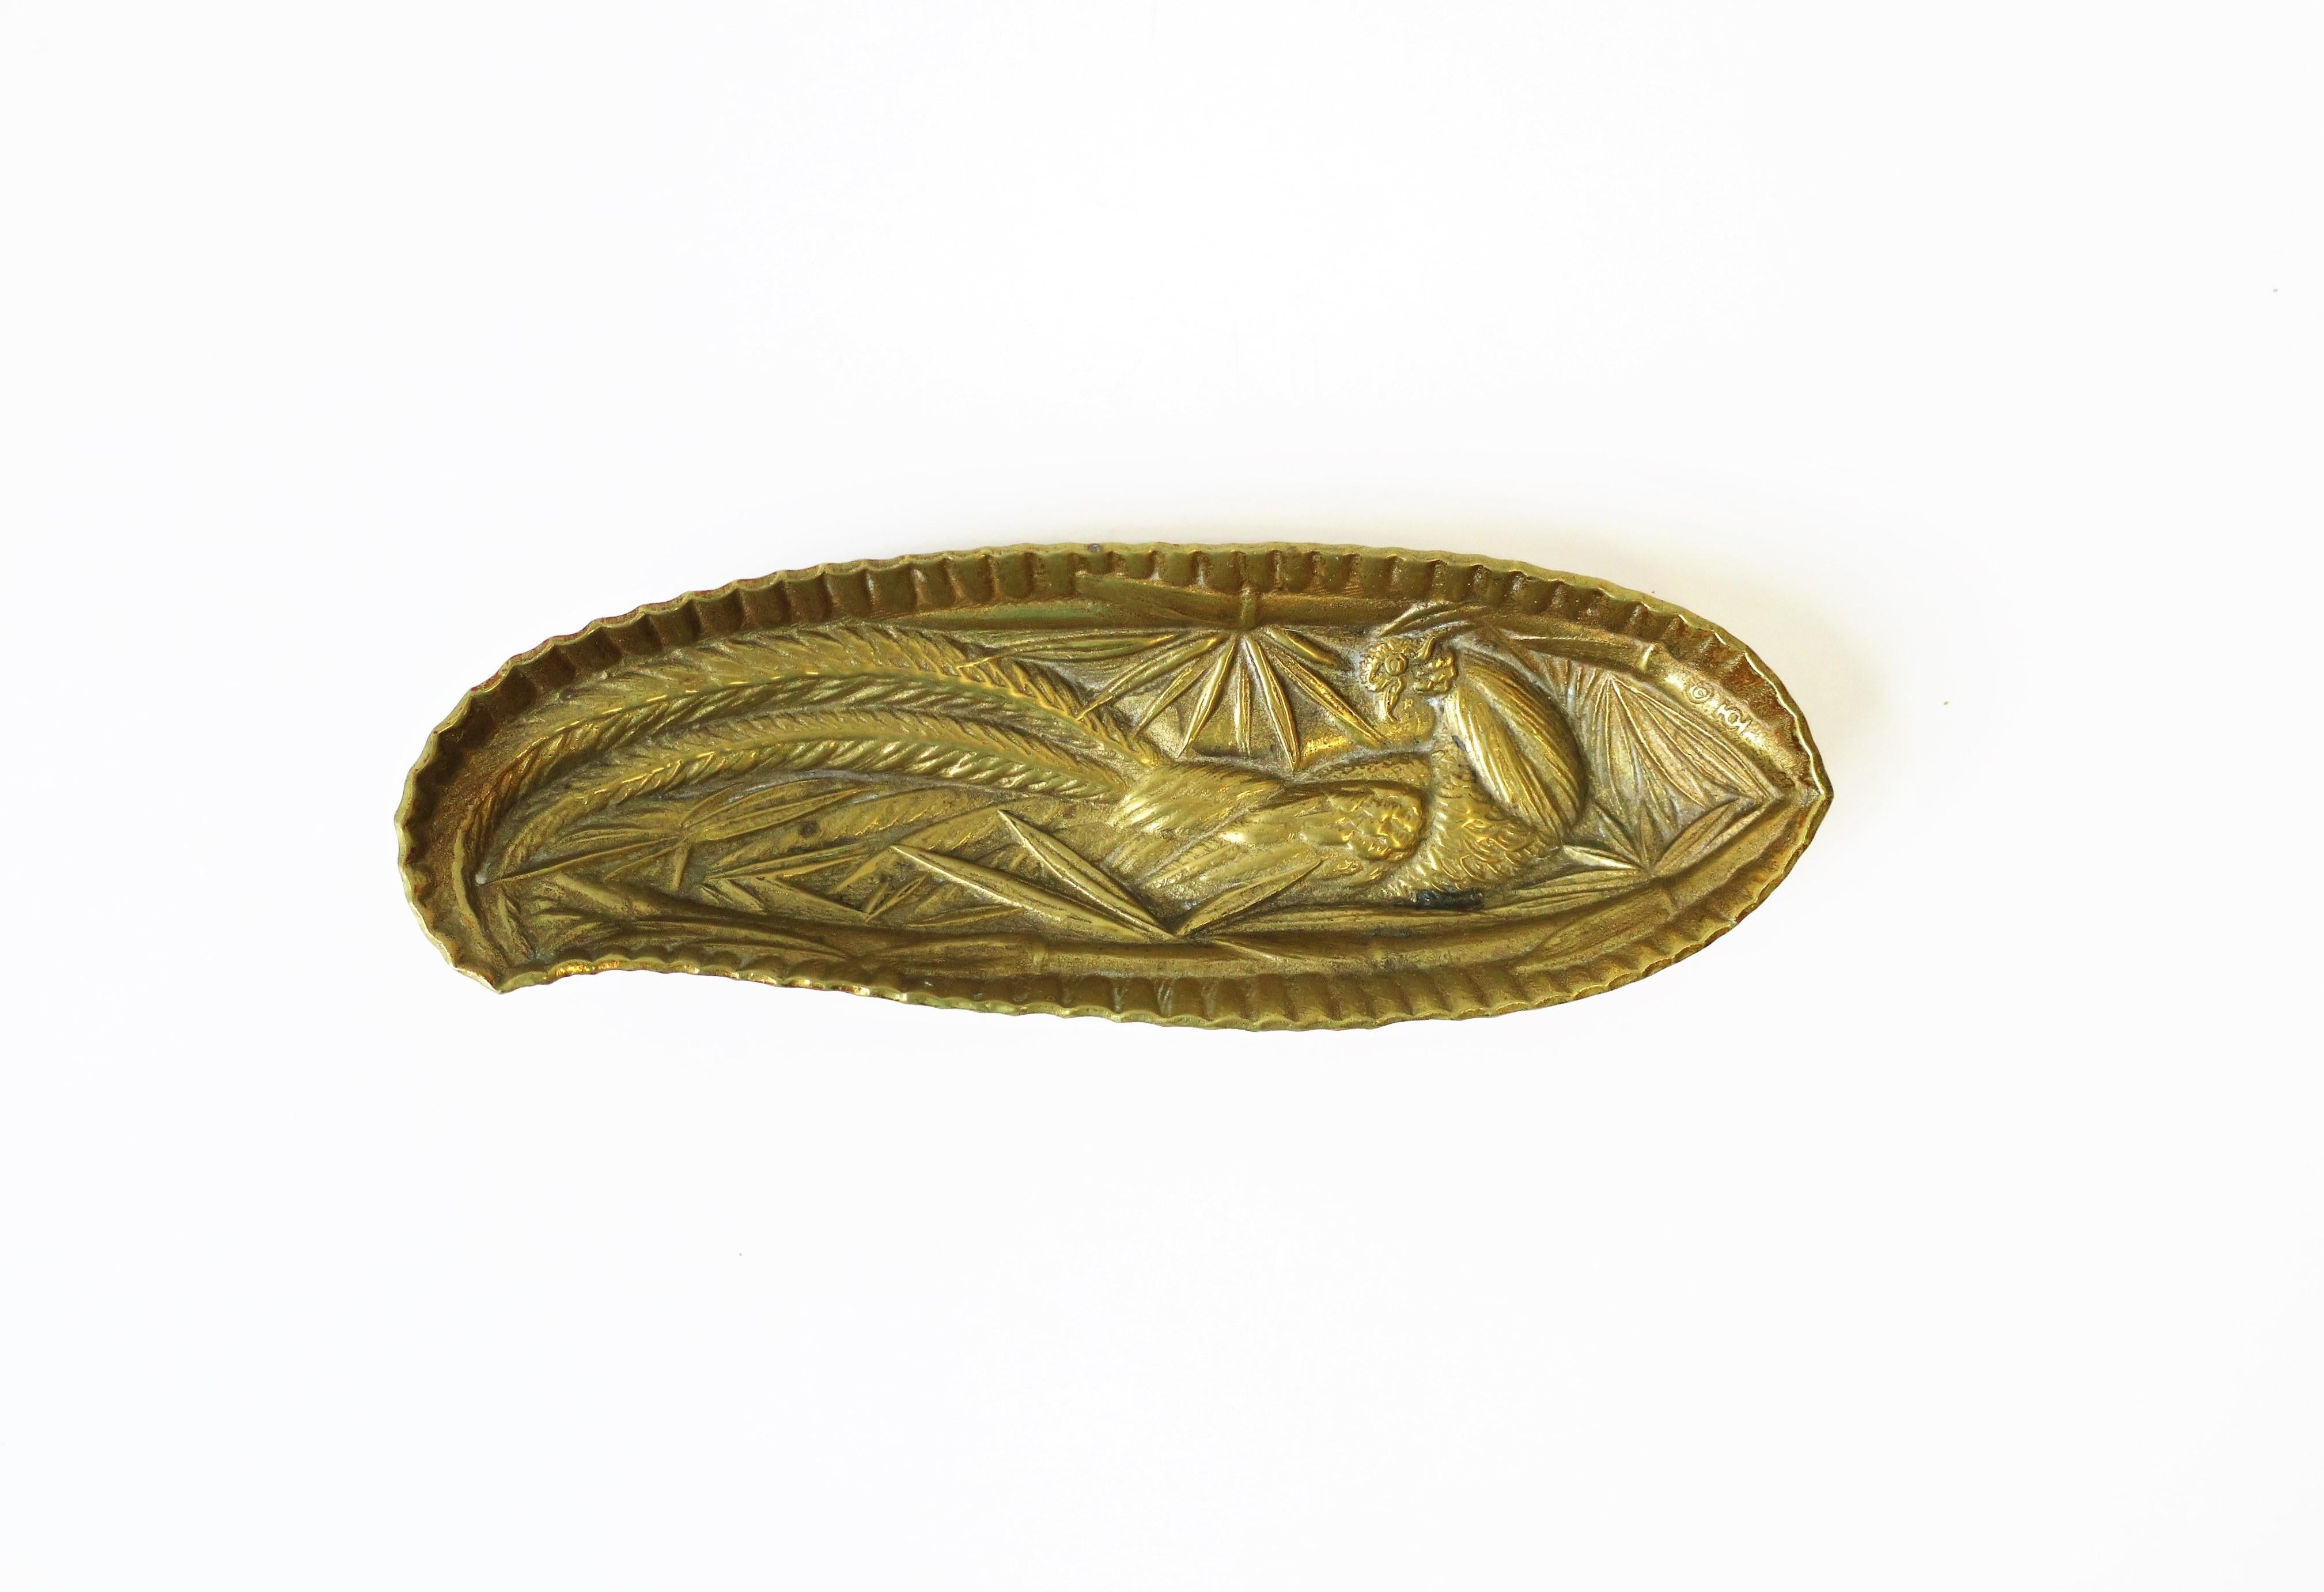 A beautiful and substantial solid brass oblong vide-poche dish embossed with pheasant peacock bird designed by Scandinavian Norwegian Sculptor Oscar J. W. Hansen, circa 1948. With maker's mark on bottom as show in image #12. 

Measures: 3